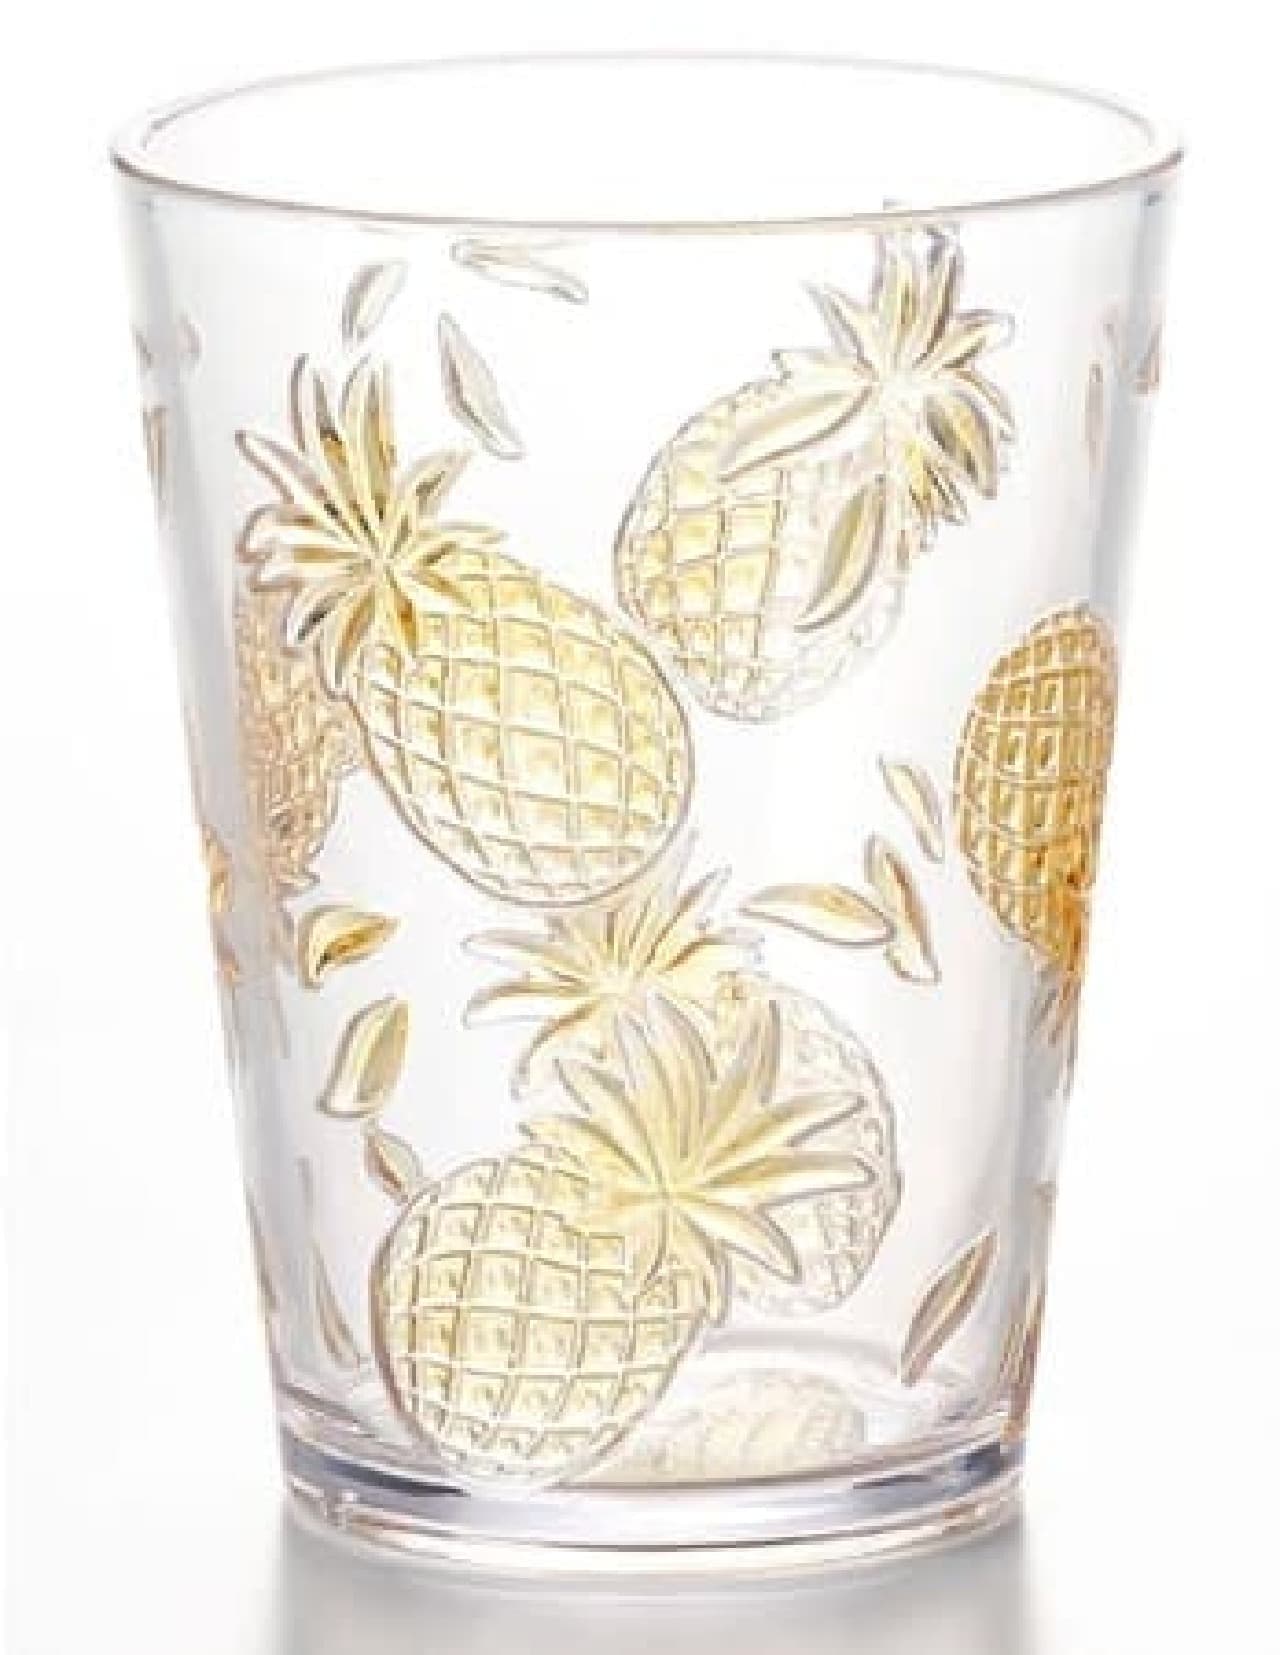 Nitori pine pattern tumblers and placemats are now available! Popular Aurora tumbler new color